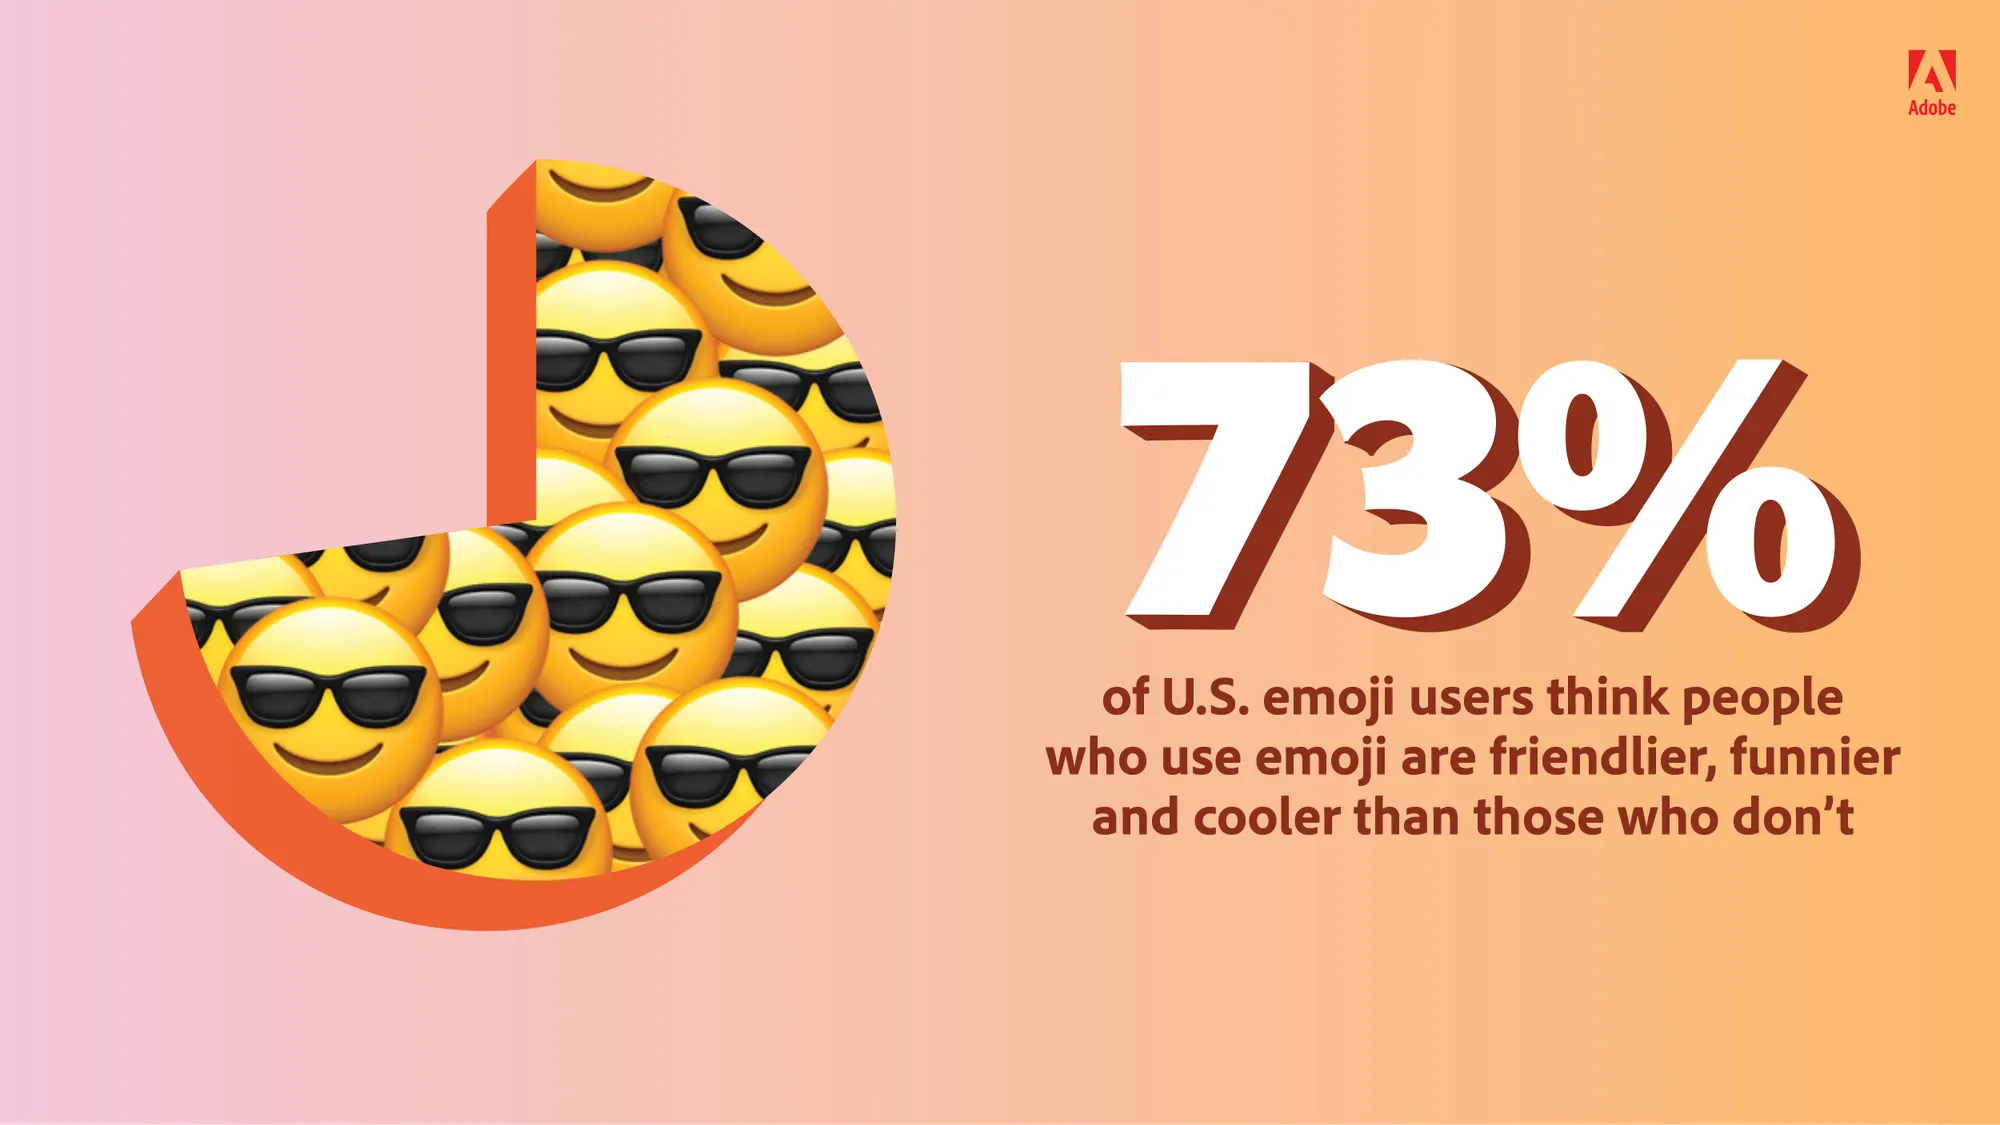 73% of U.S emoji users think people who use emoji are friendlier, funnier and cooler than those who don't. 